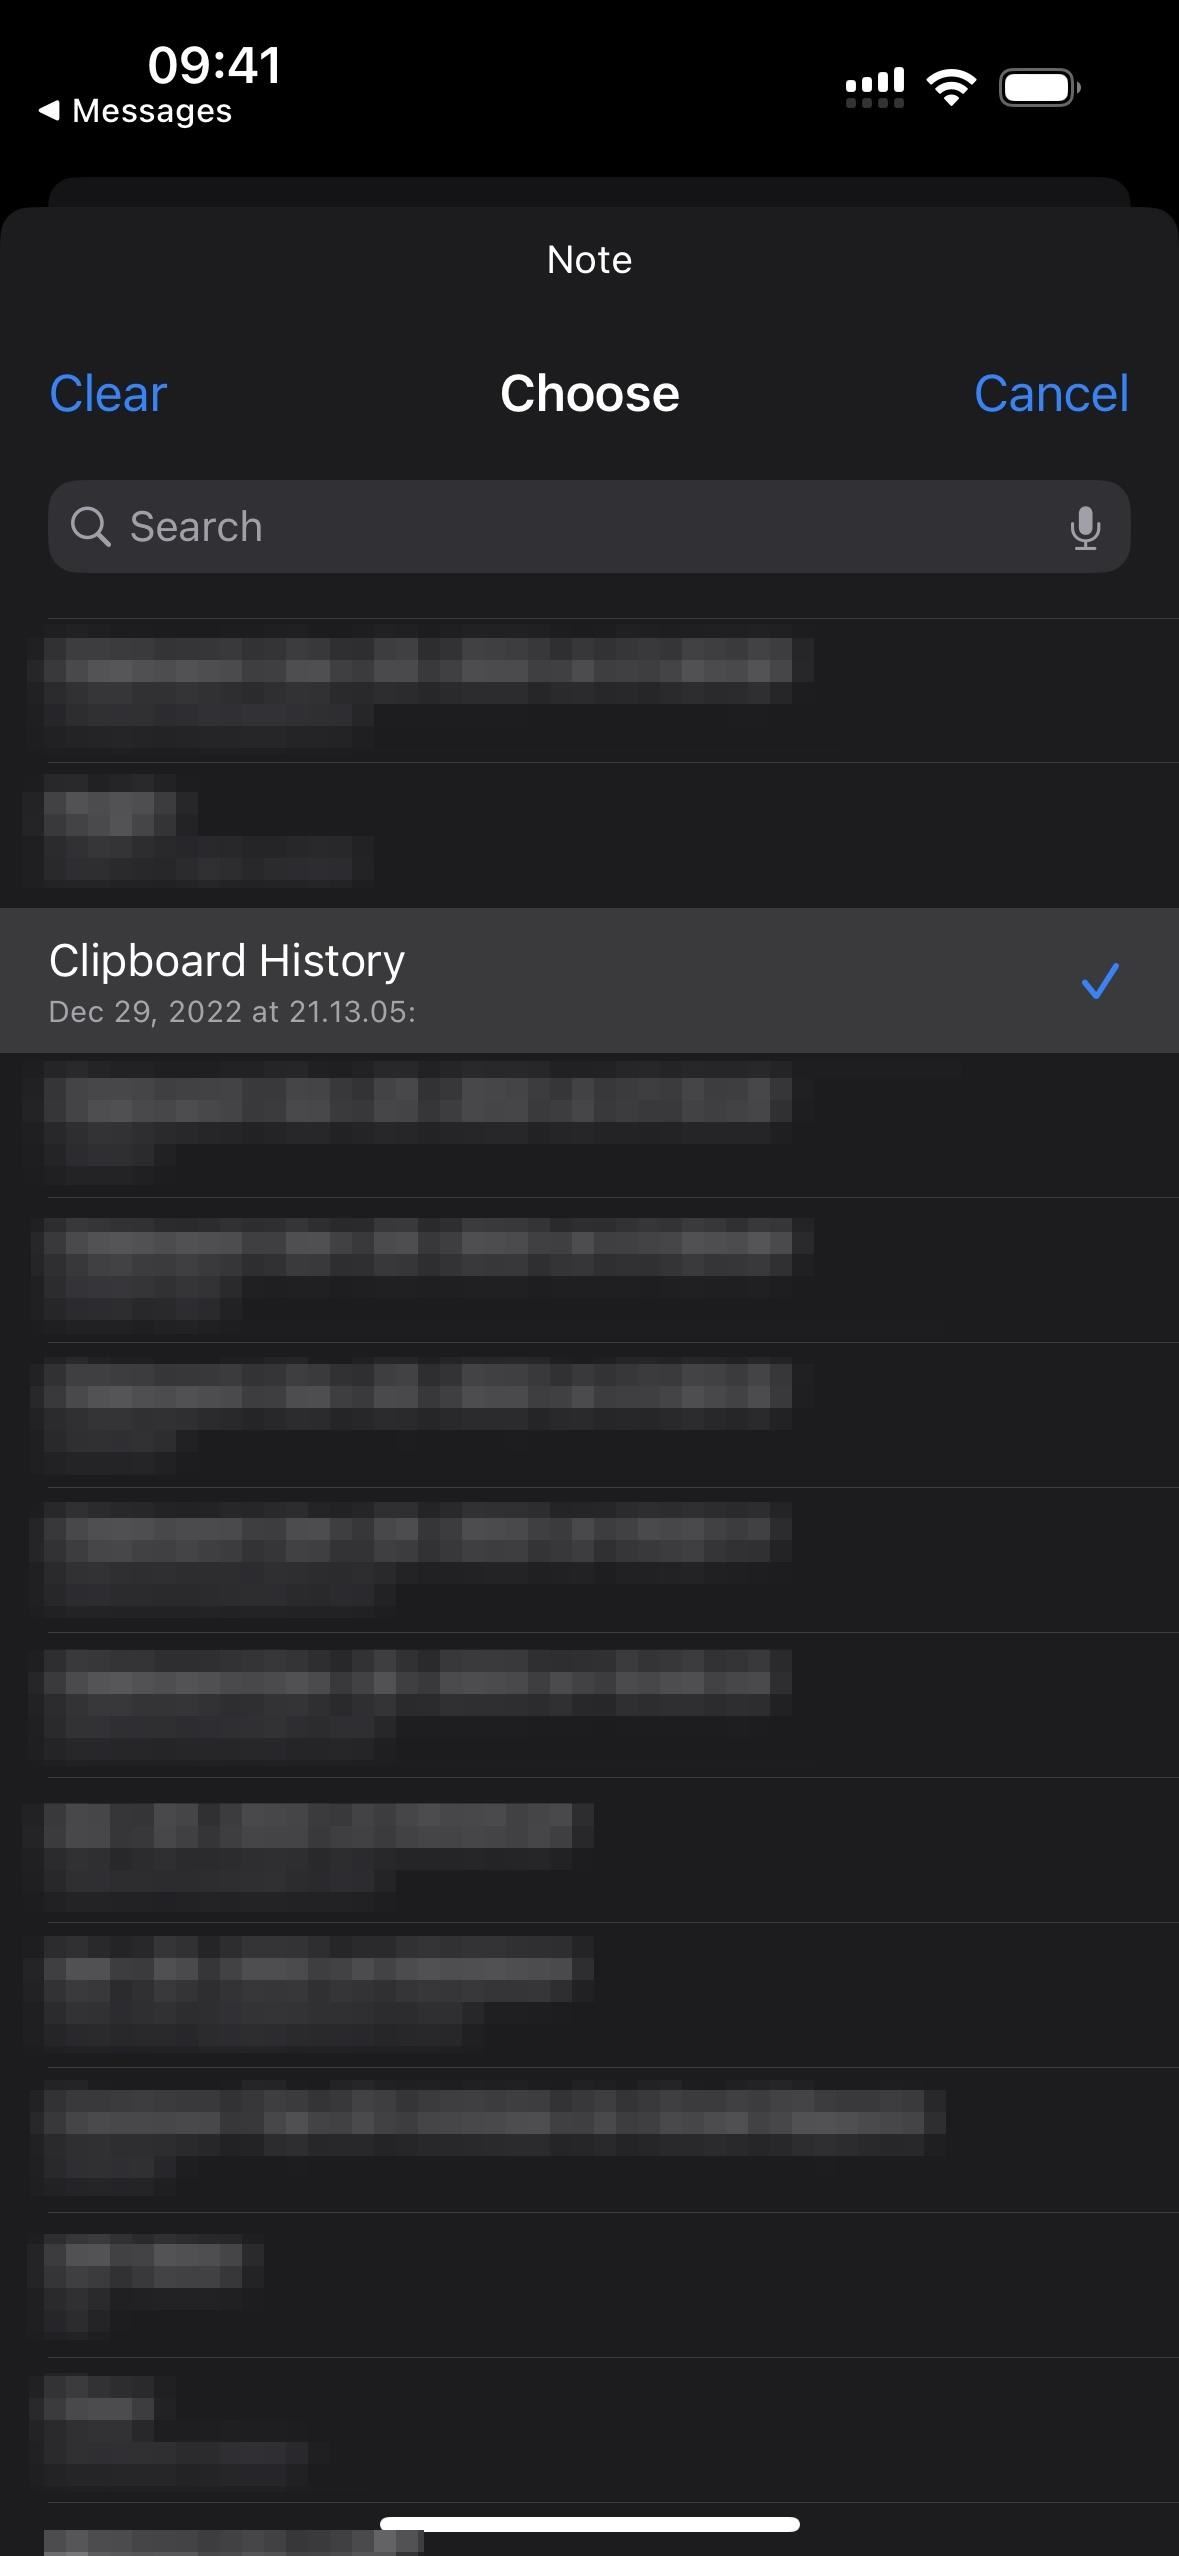 Use This Trick to View Your Complete Clipboard History and Recopy Anything